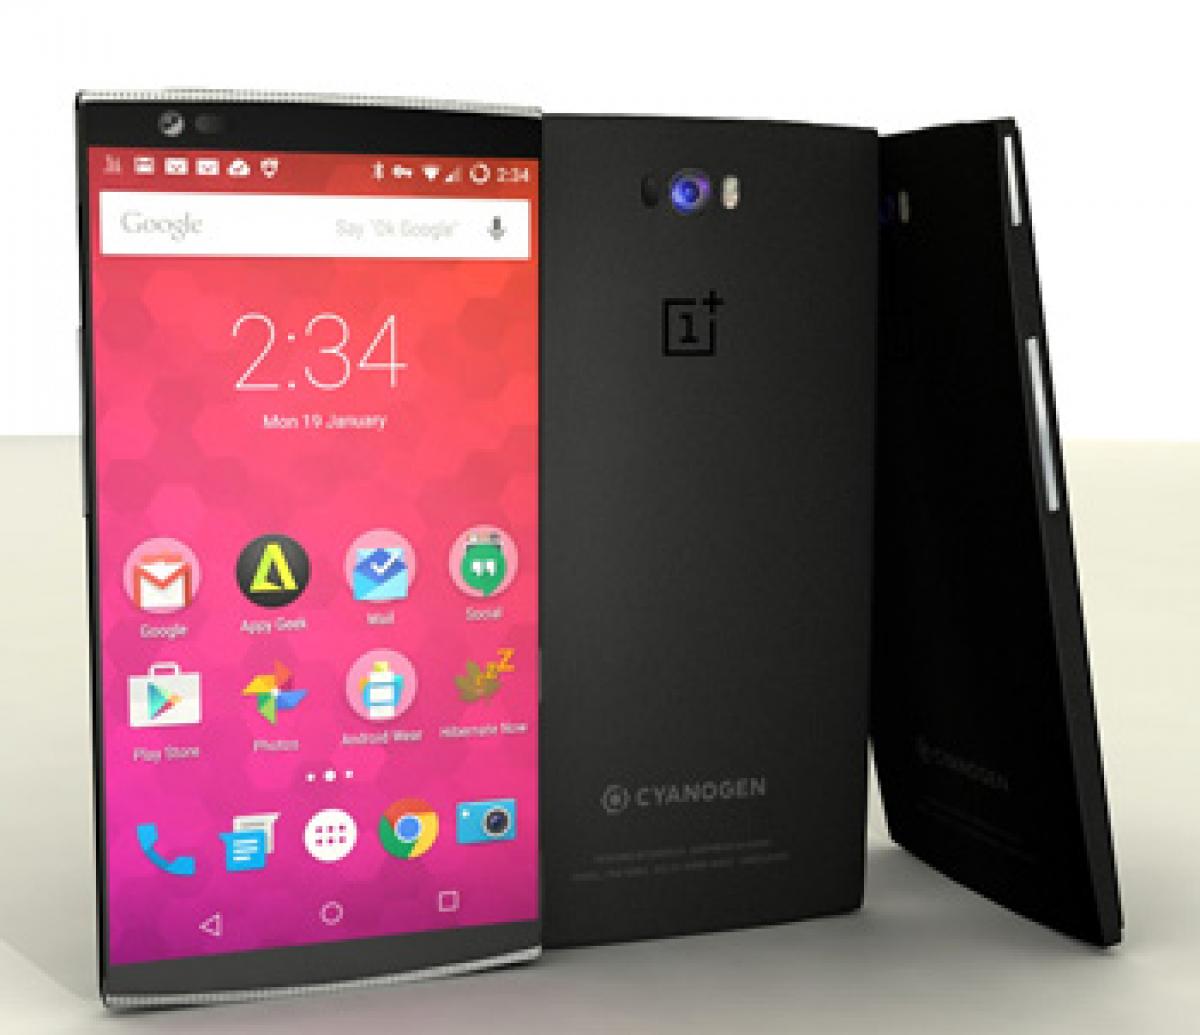 OnePlus 2 smartphone to come with full-metal build